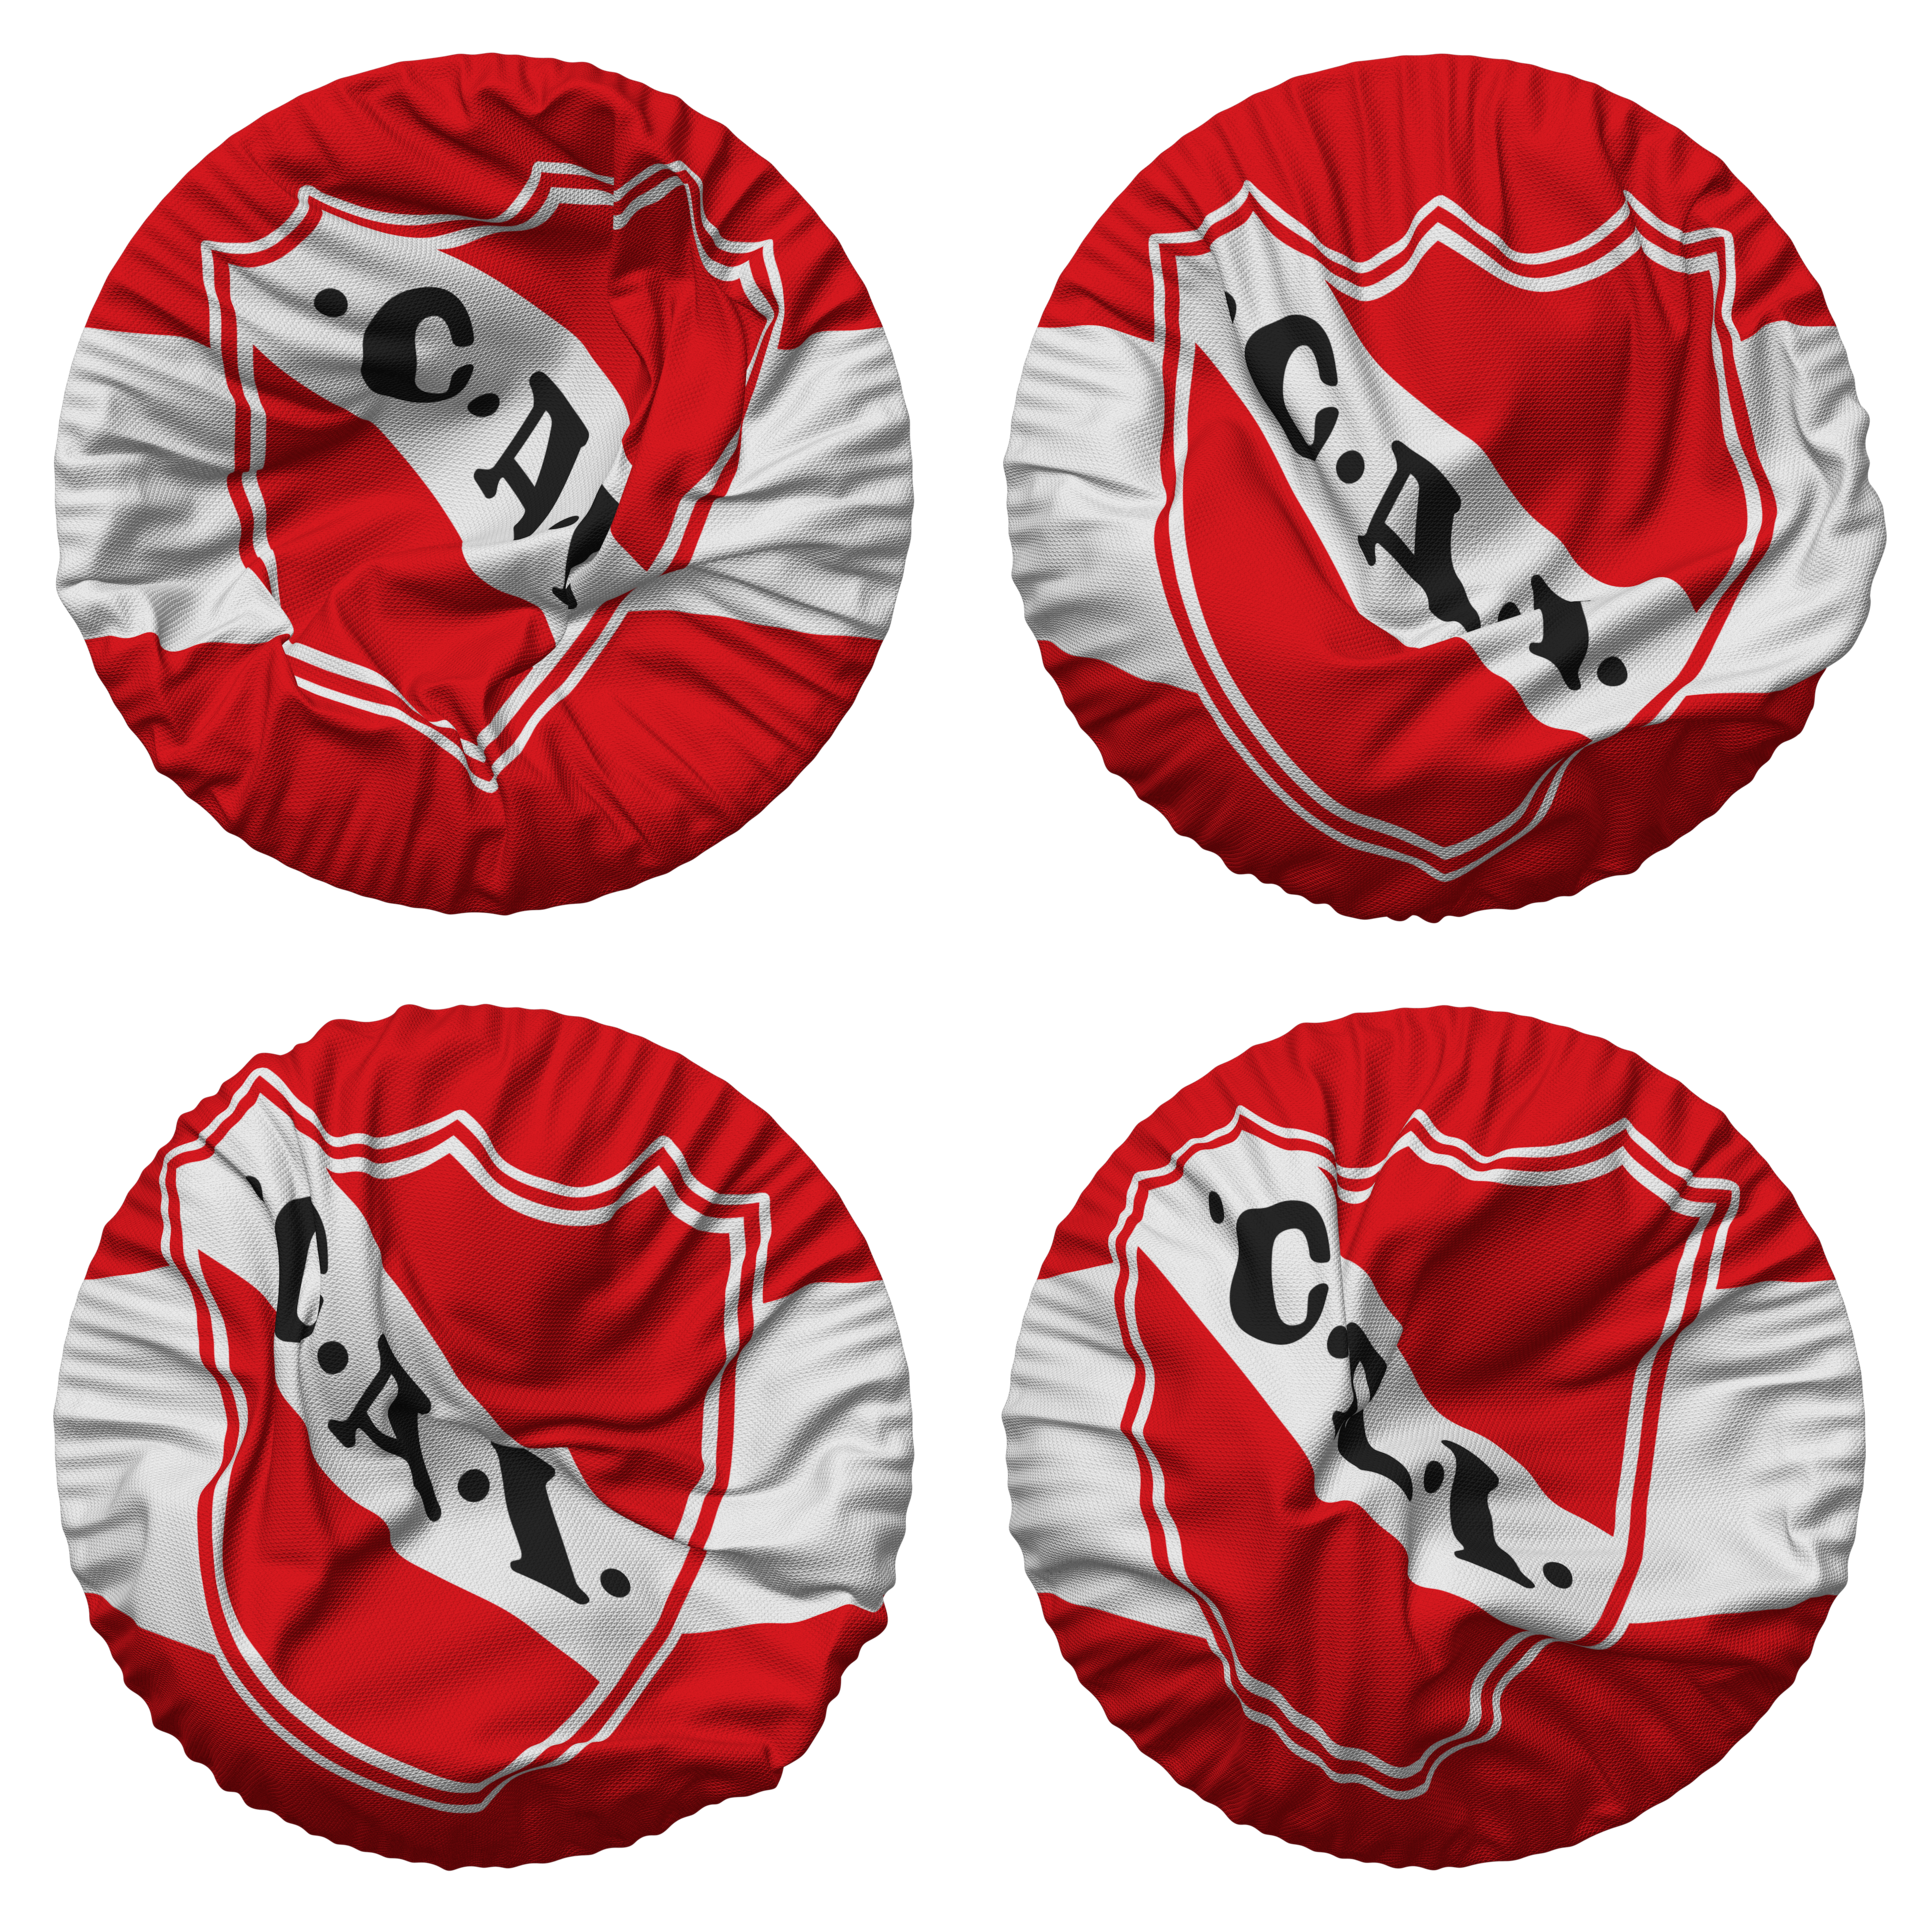 Club Atletico Independiente Pinned Flag from Corners, Isolated with  Different Waving Variations, 3D Rendering 24798009 PNG